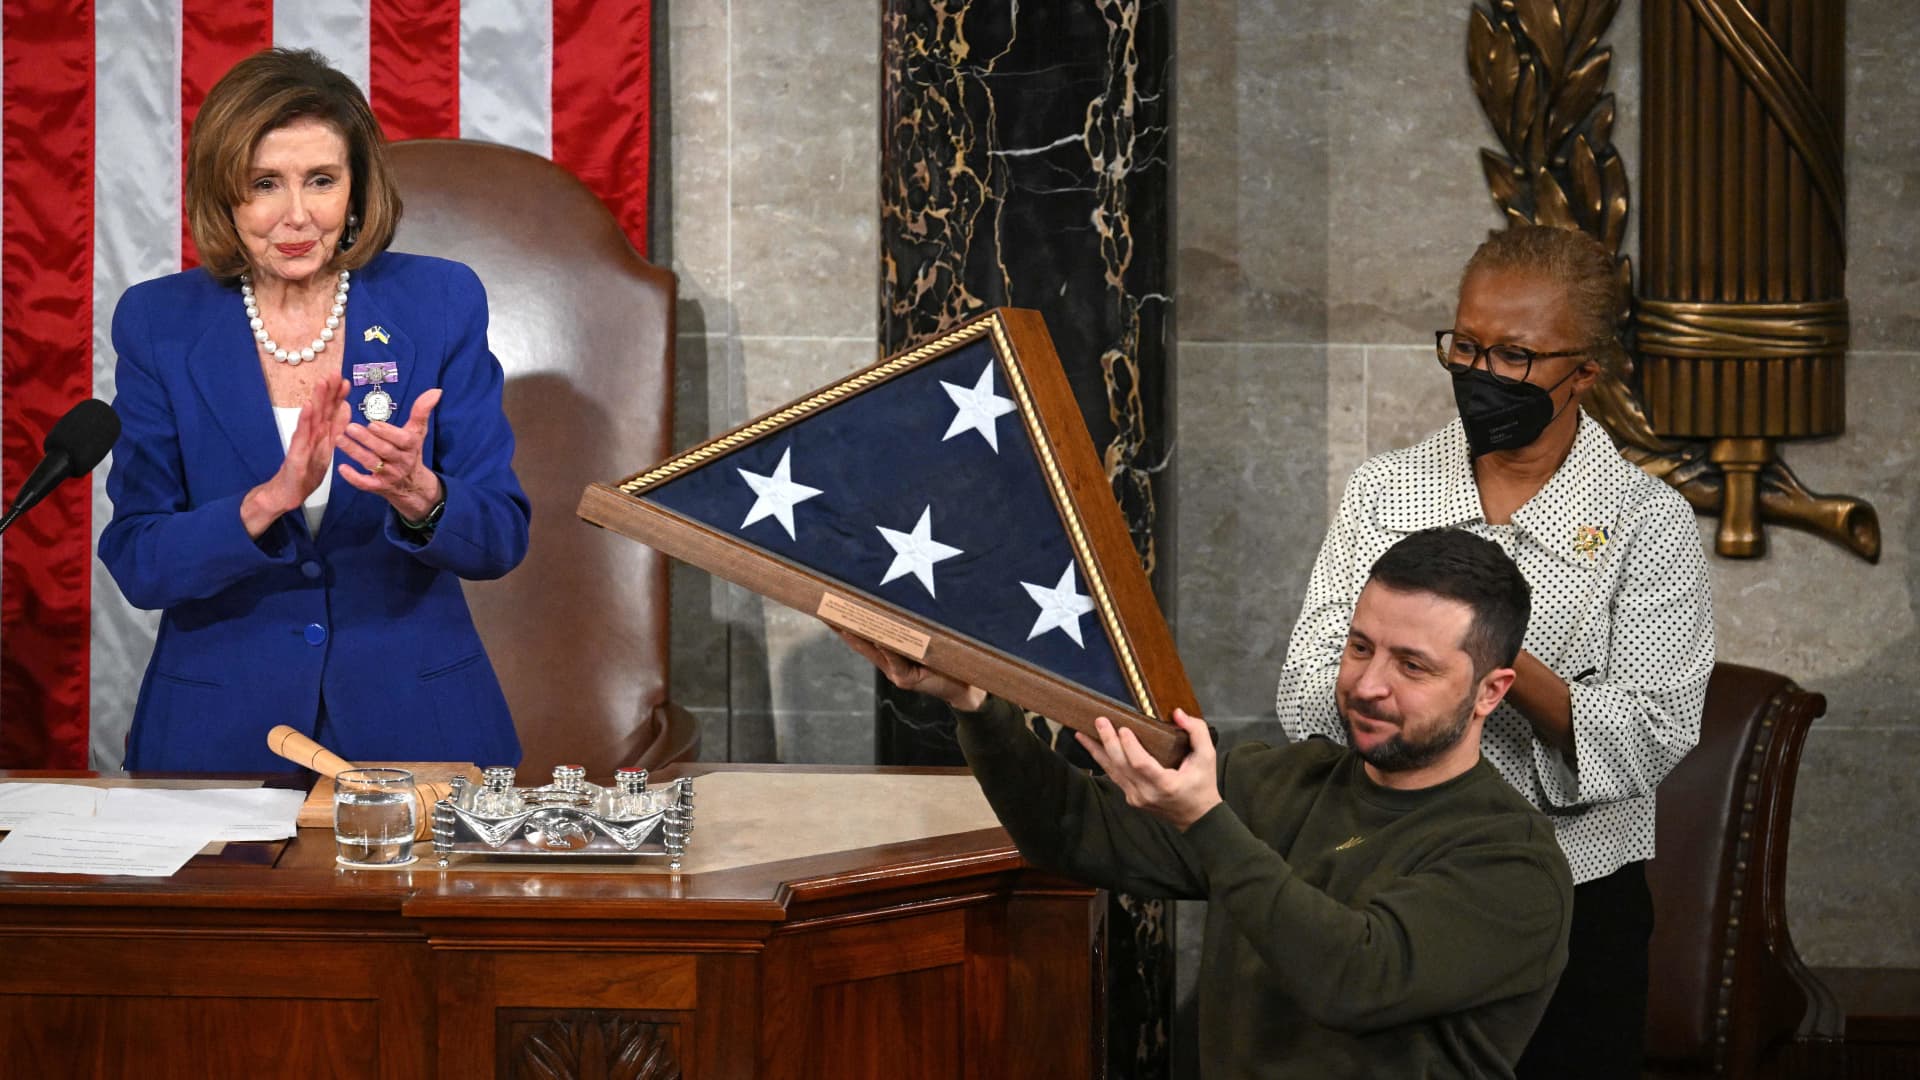 Ukraine's President Volodymyr Zelensky receives from US House Speaker Nancy Pelosi (D-CA) (L) a US national flag during his address to the US Congress at the US Capitol in Washington, DC on December 21, 2022.